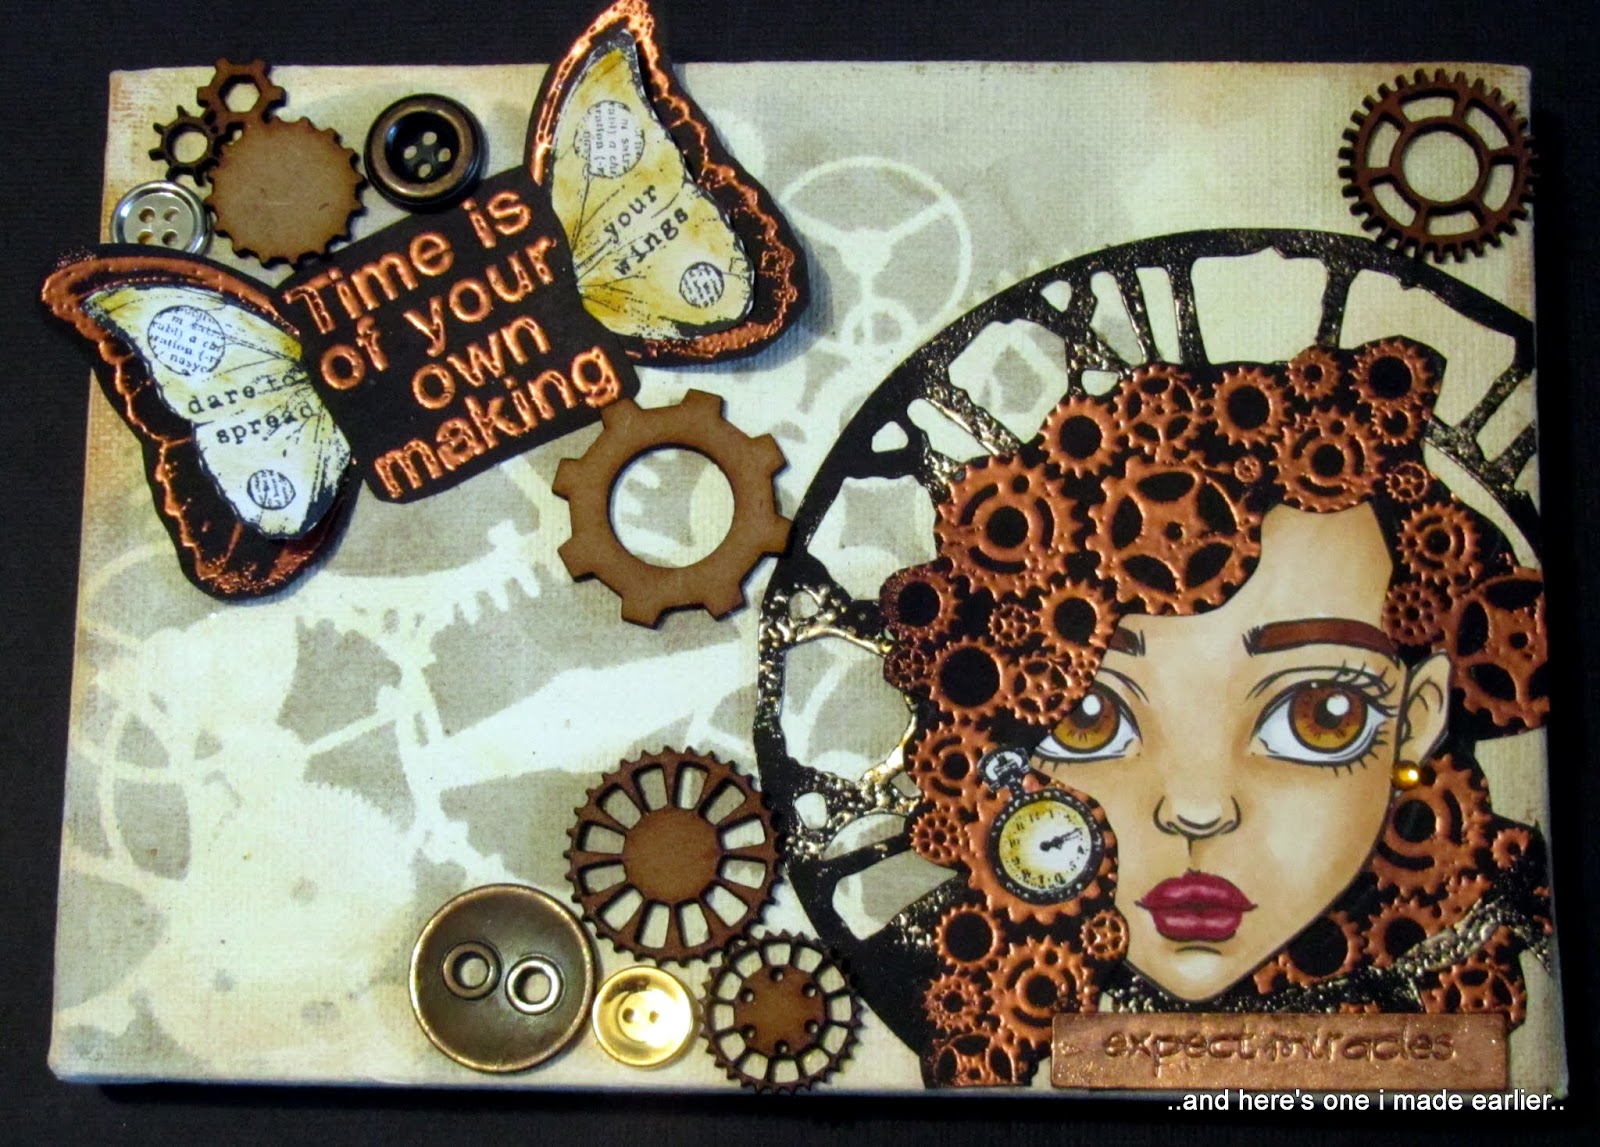 and here's one i made earlier...: Steampunk canvas